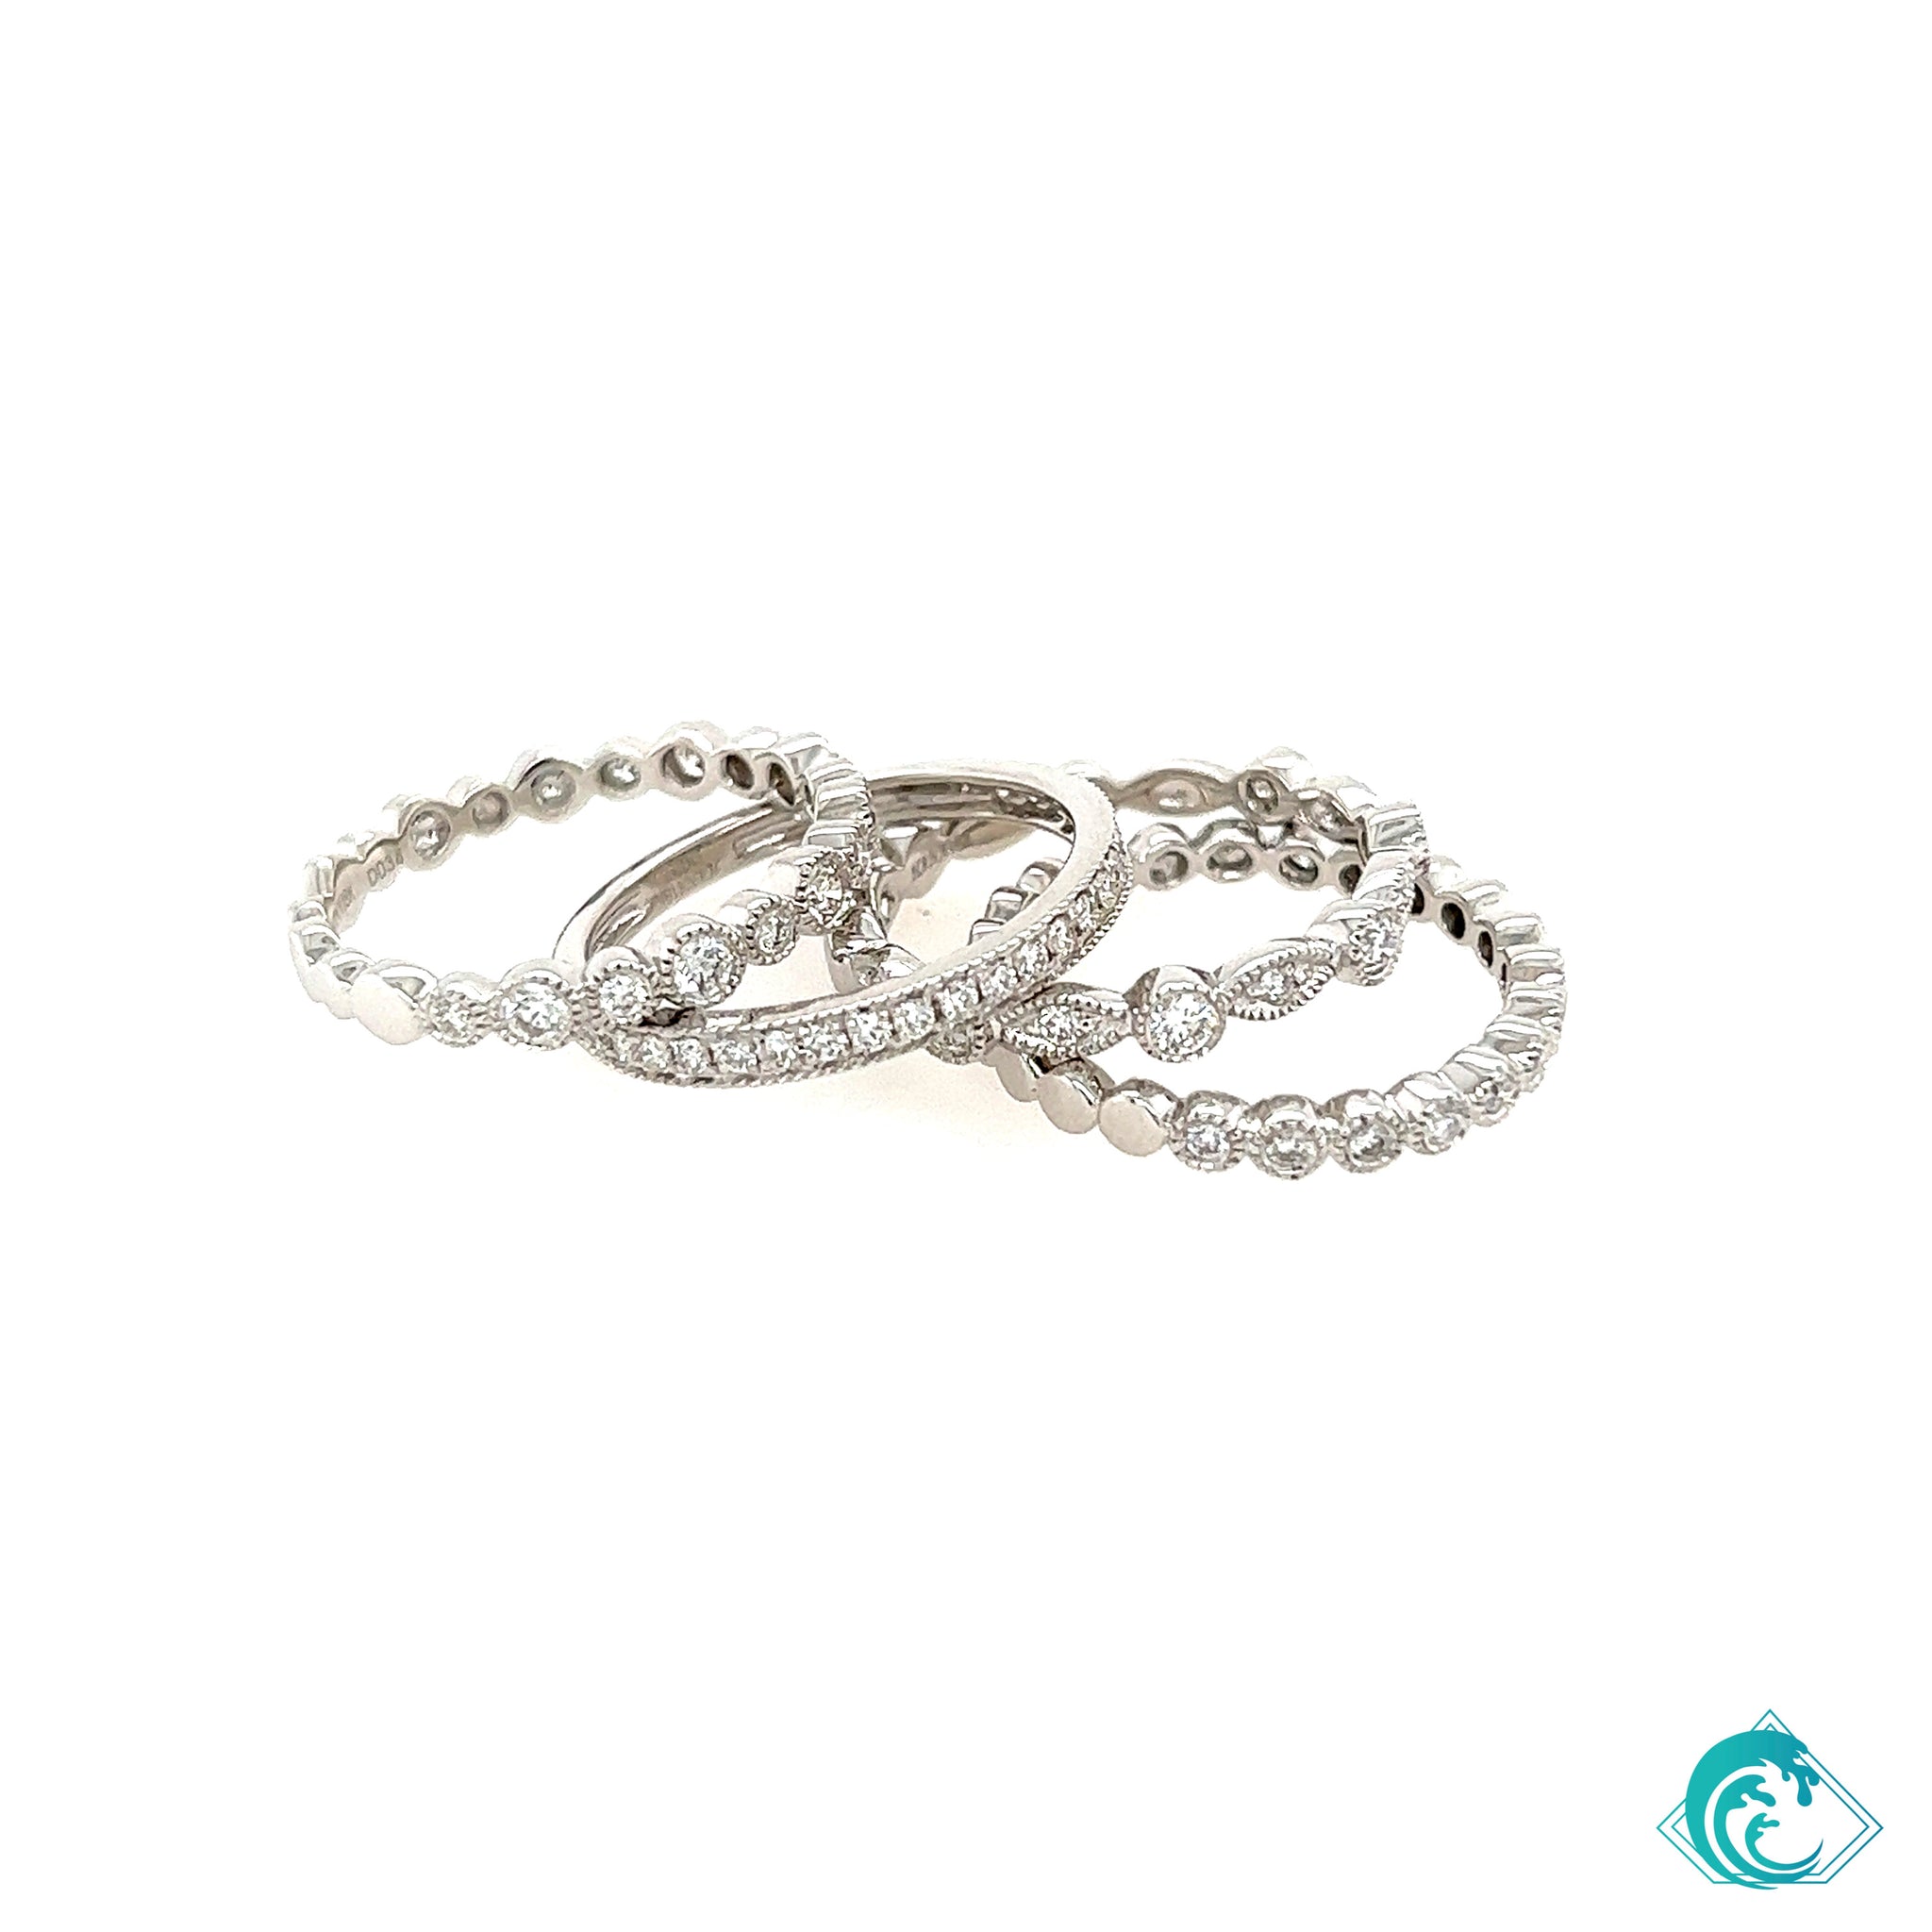 18K WG Stackable Diamond Bands (Sold Separately)